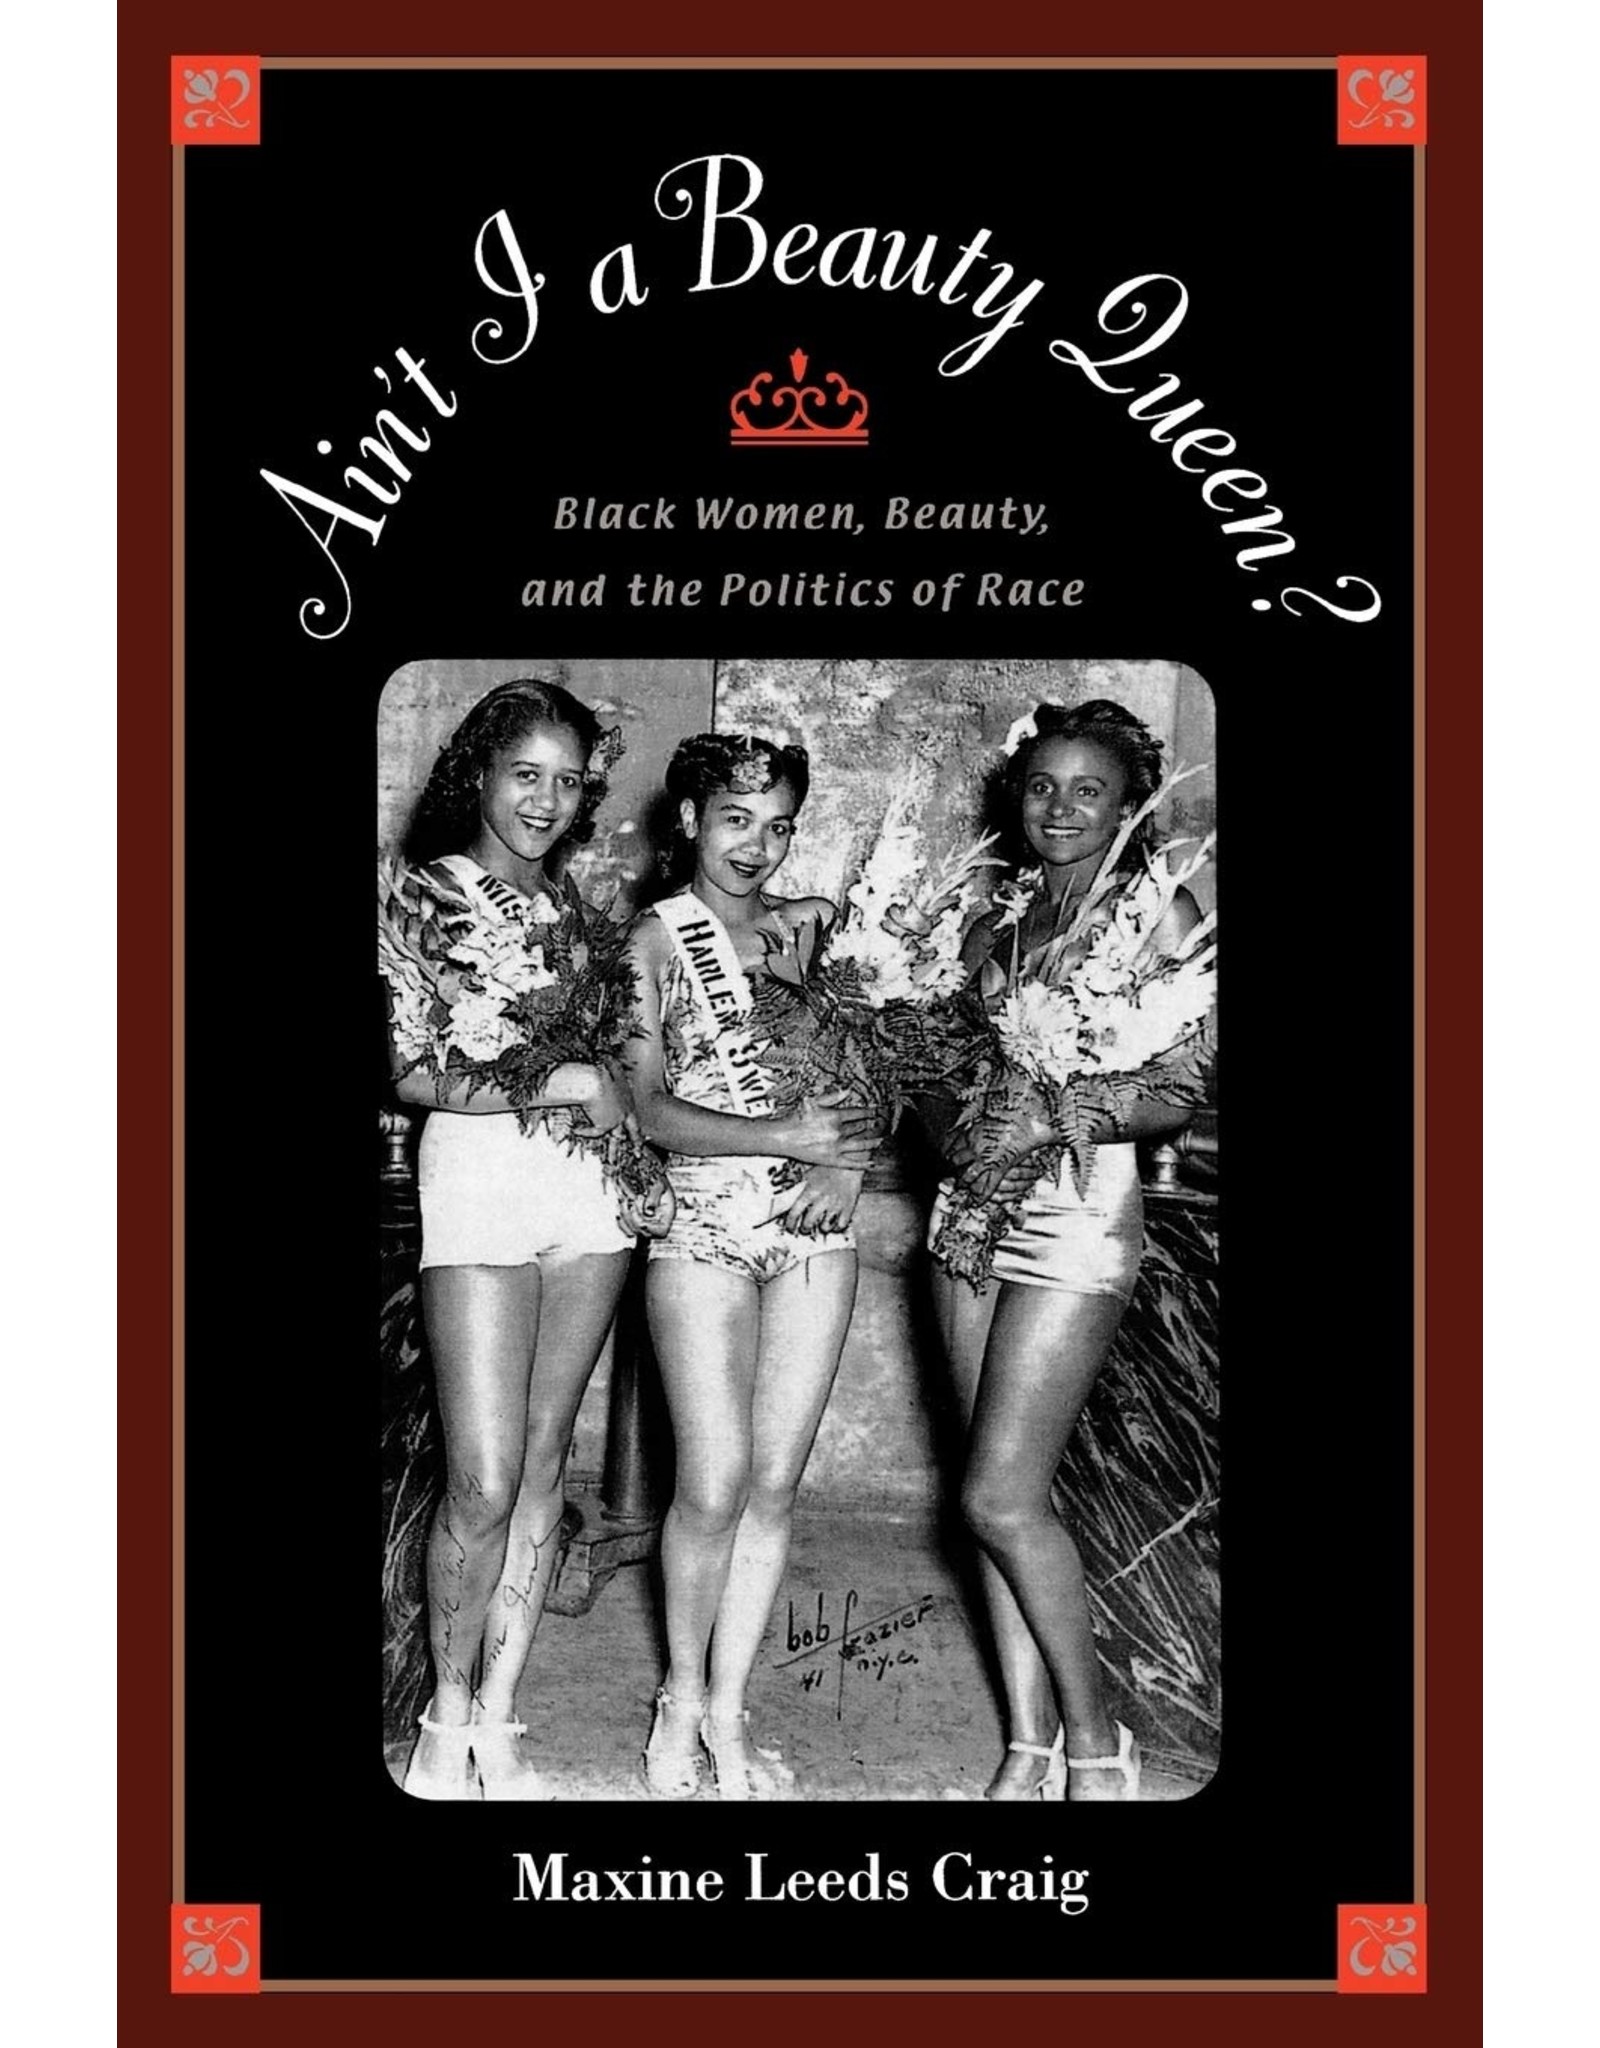 Literature Ain't I a Beauty Queen?: Black Women, Beauty, and the Politics of Race